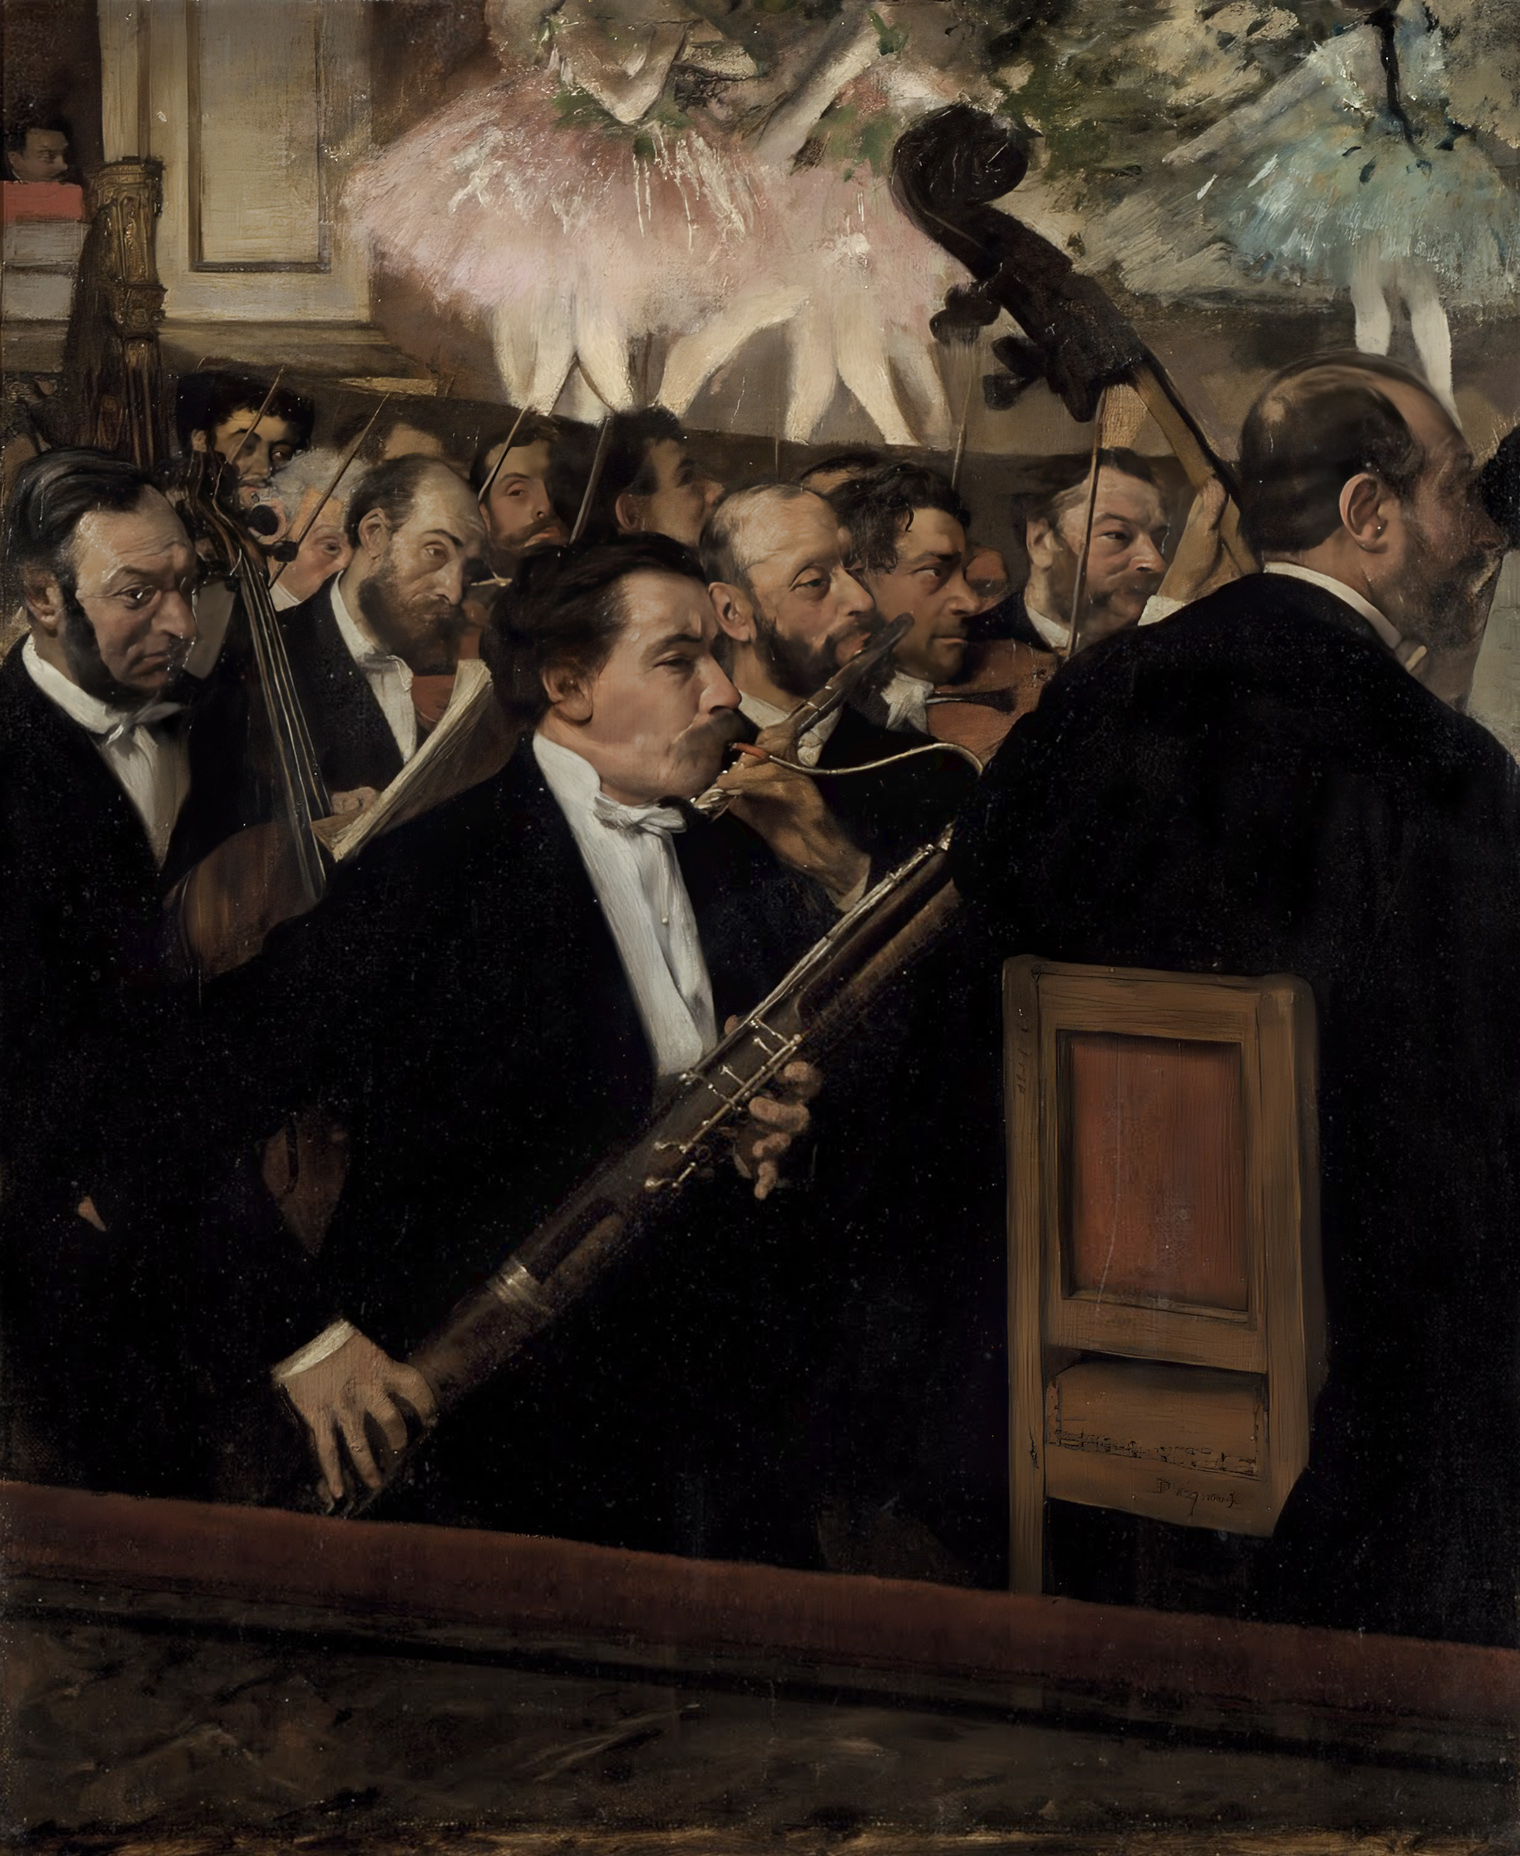 The Orchestra at the Opera | Edgar Degas, 1868 | Musée d'Orsay